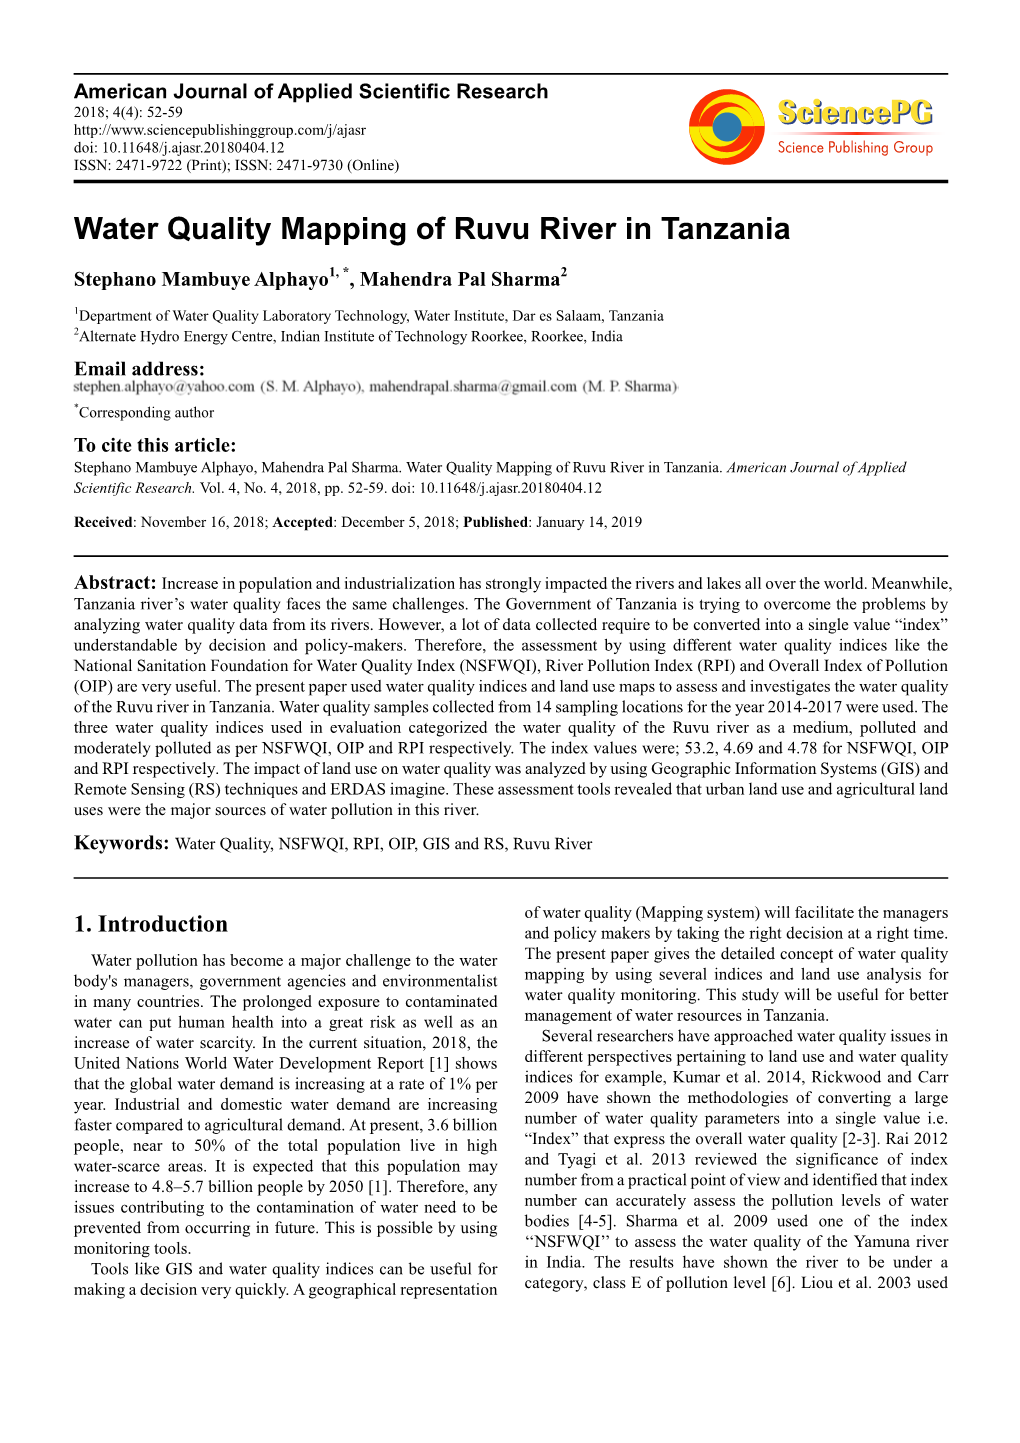 Water Quality Mapping of Ruvu River in Tanzania